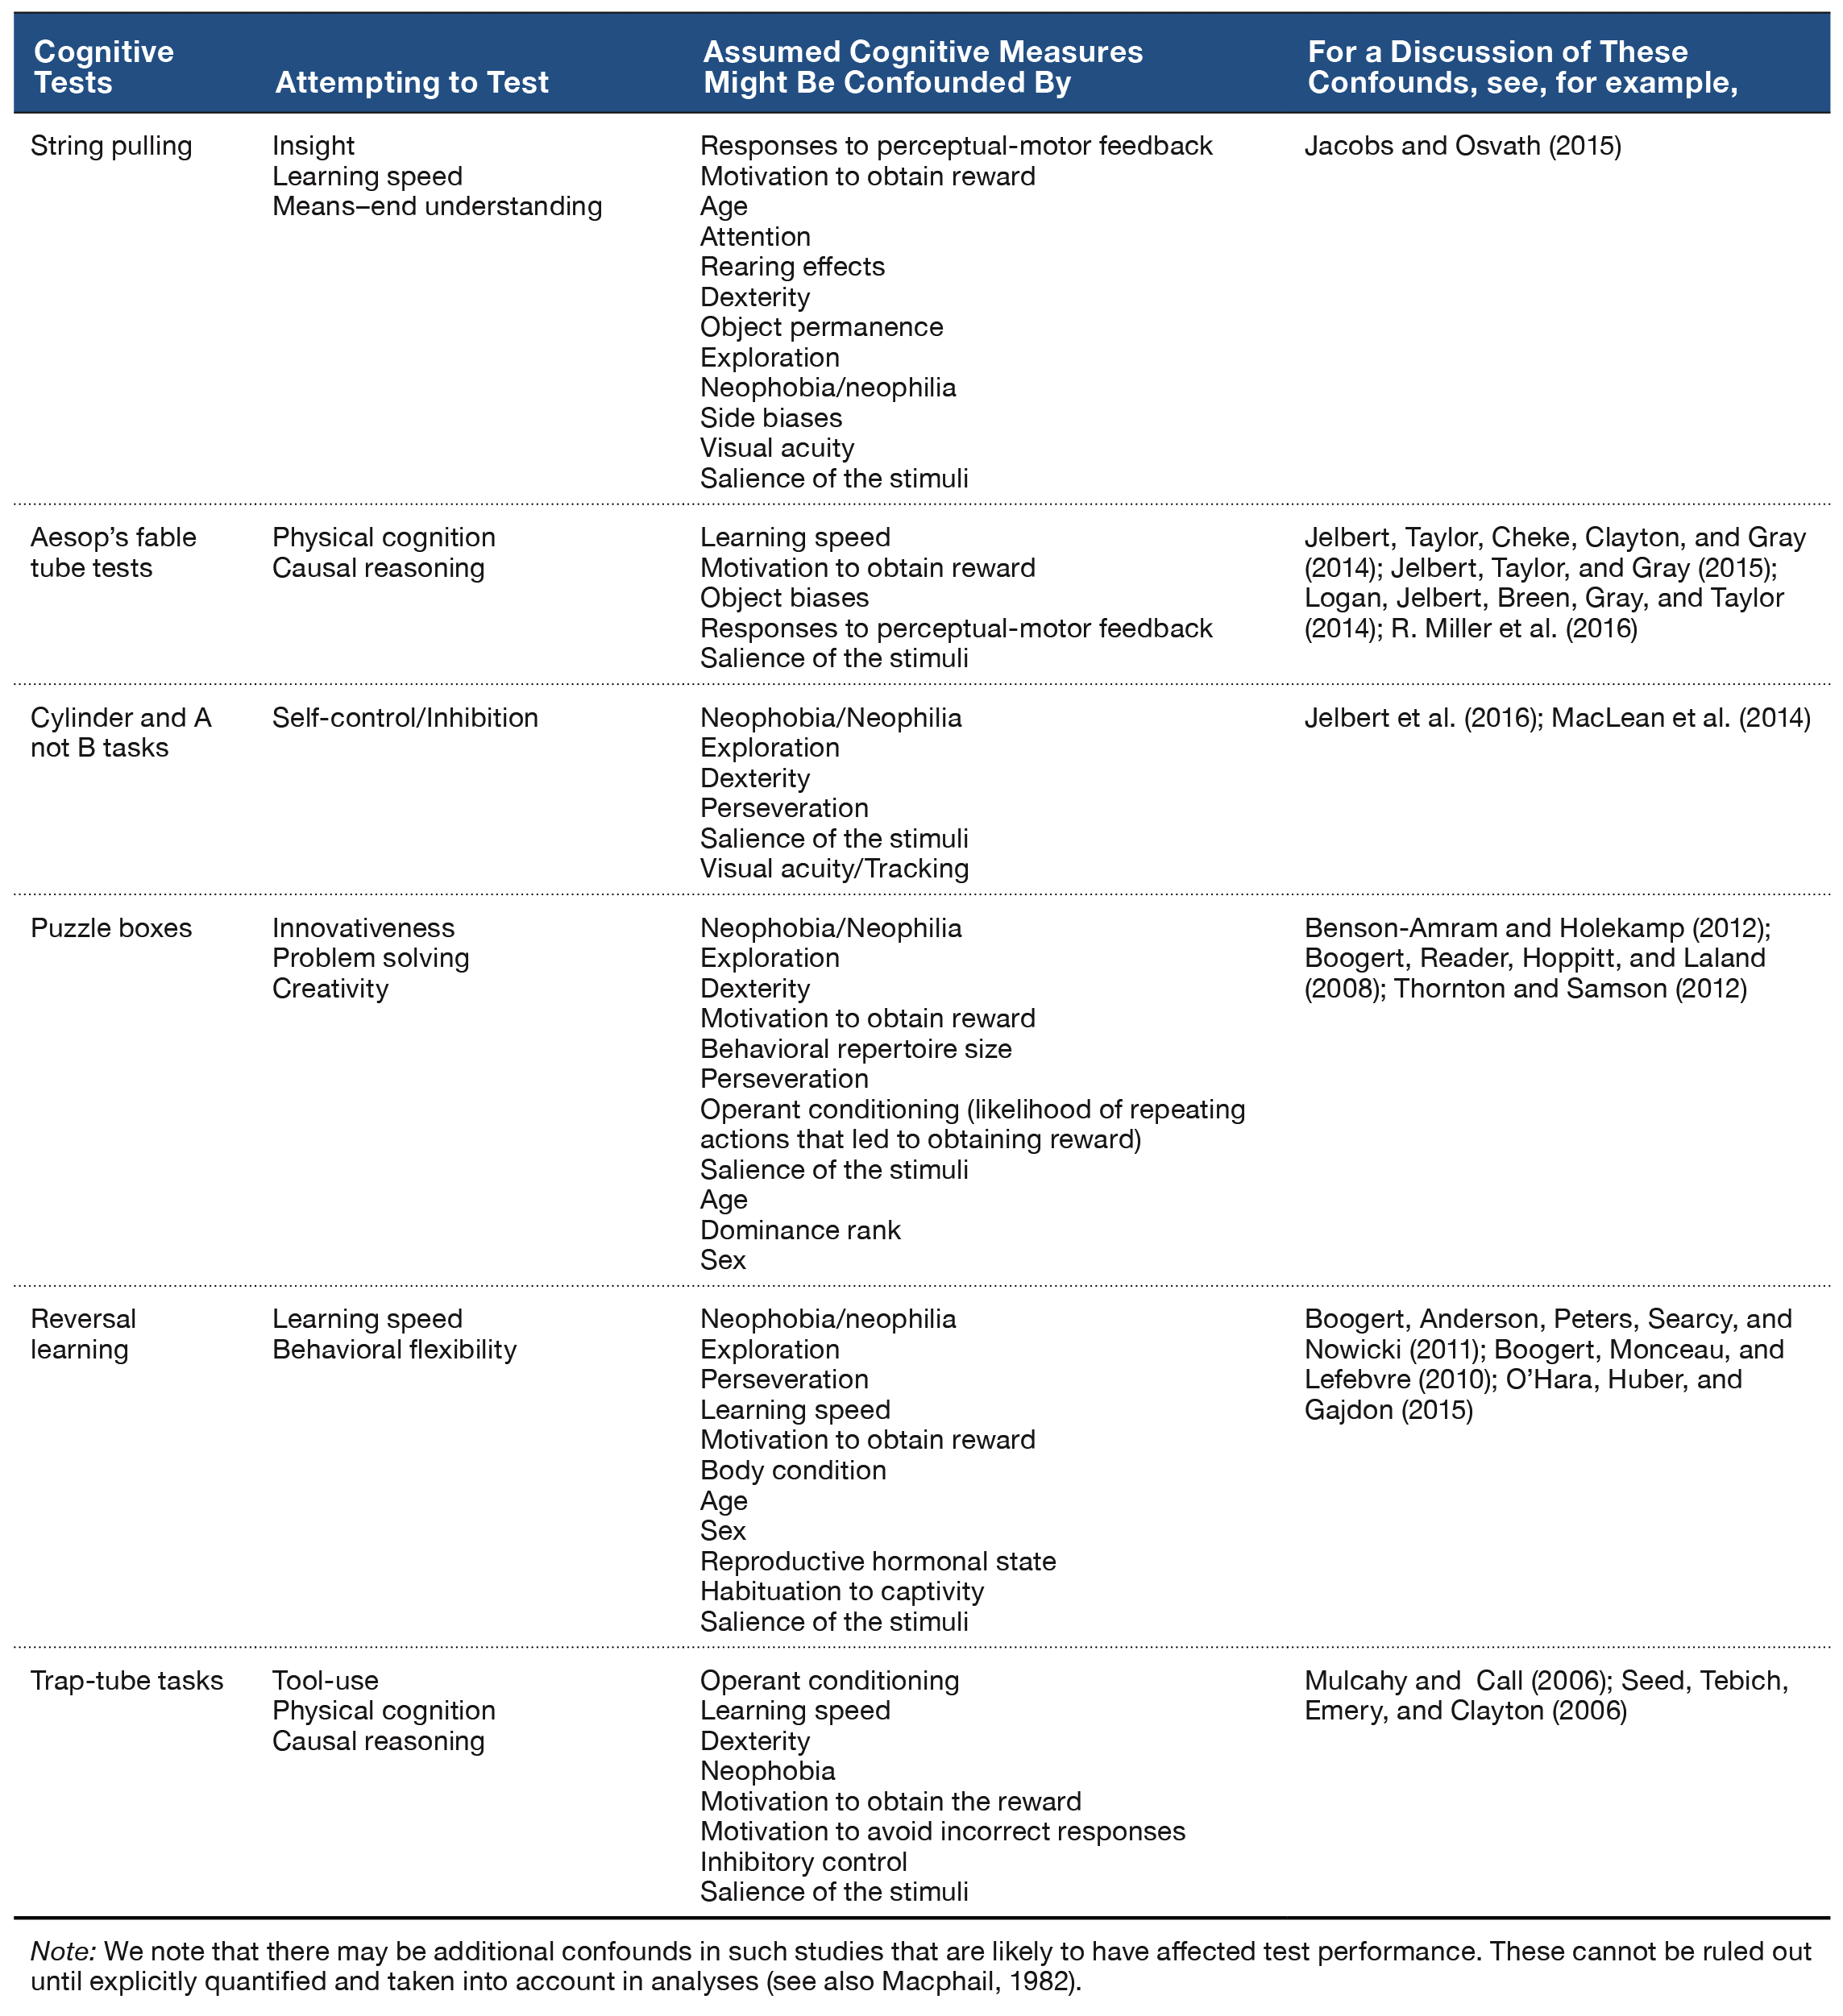 Table 2. Examples of experiments attempting to test cognition, and their potential confounds as identified by the studies listed in the far right column.